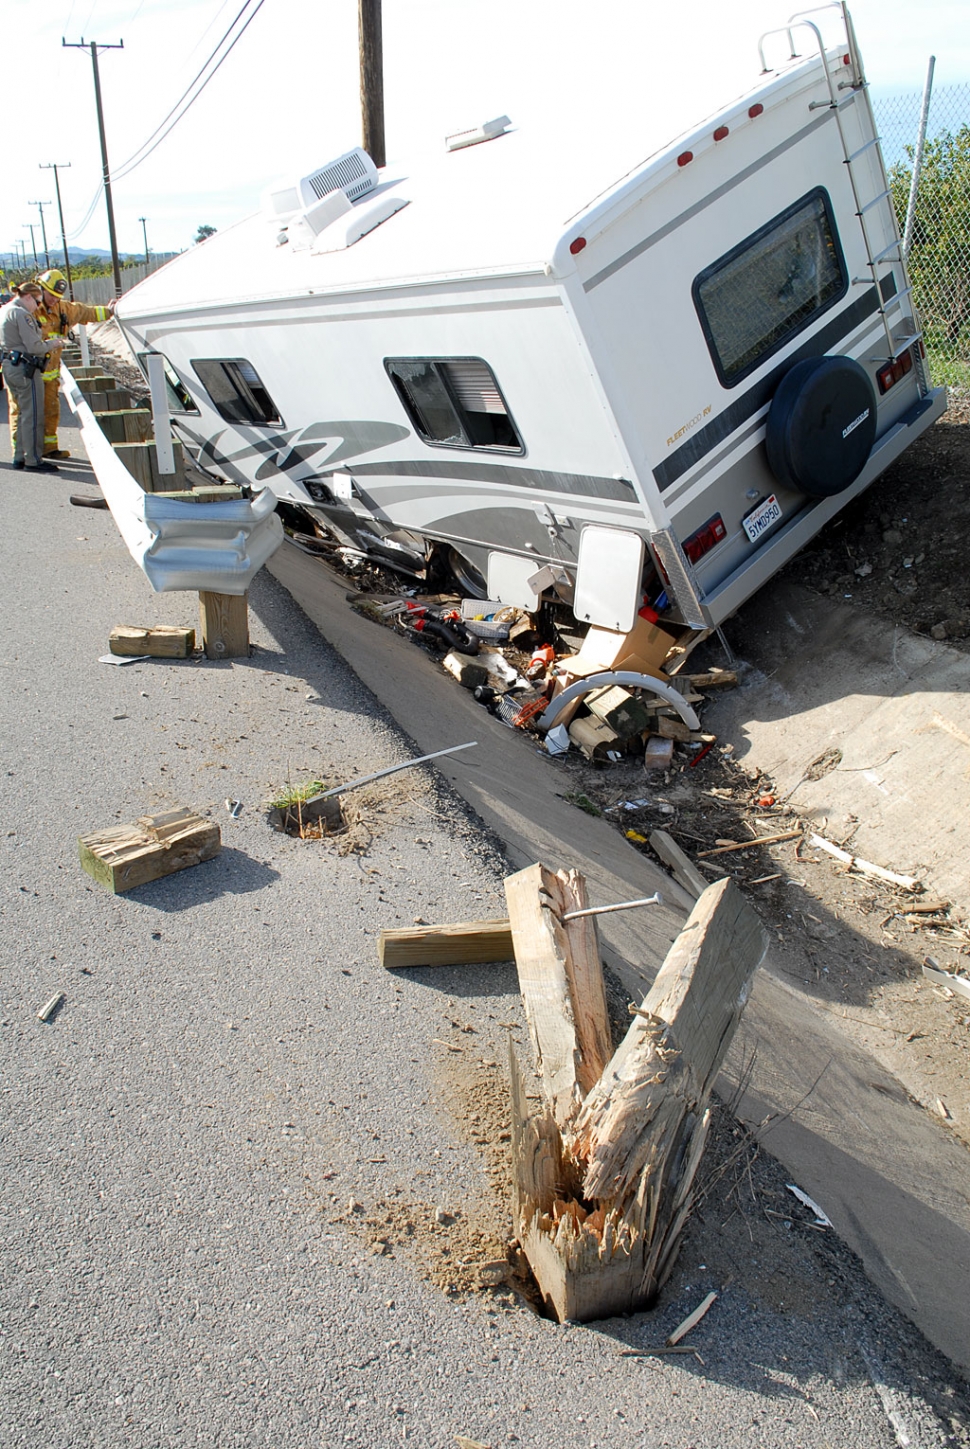 At approximately 2:00 pm on Thursday January 13th, a motorhome collided with the guardrail on the side of highway 126 near Toland Road. The driver, 73-year-old Robert Bagdad and his wife Francis suffered minor injuries in the crash and were transported to Santa Paula Hospital.